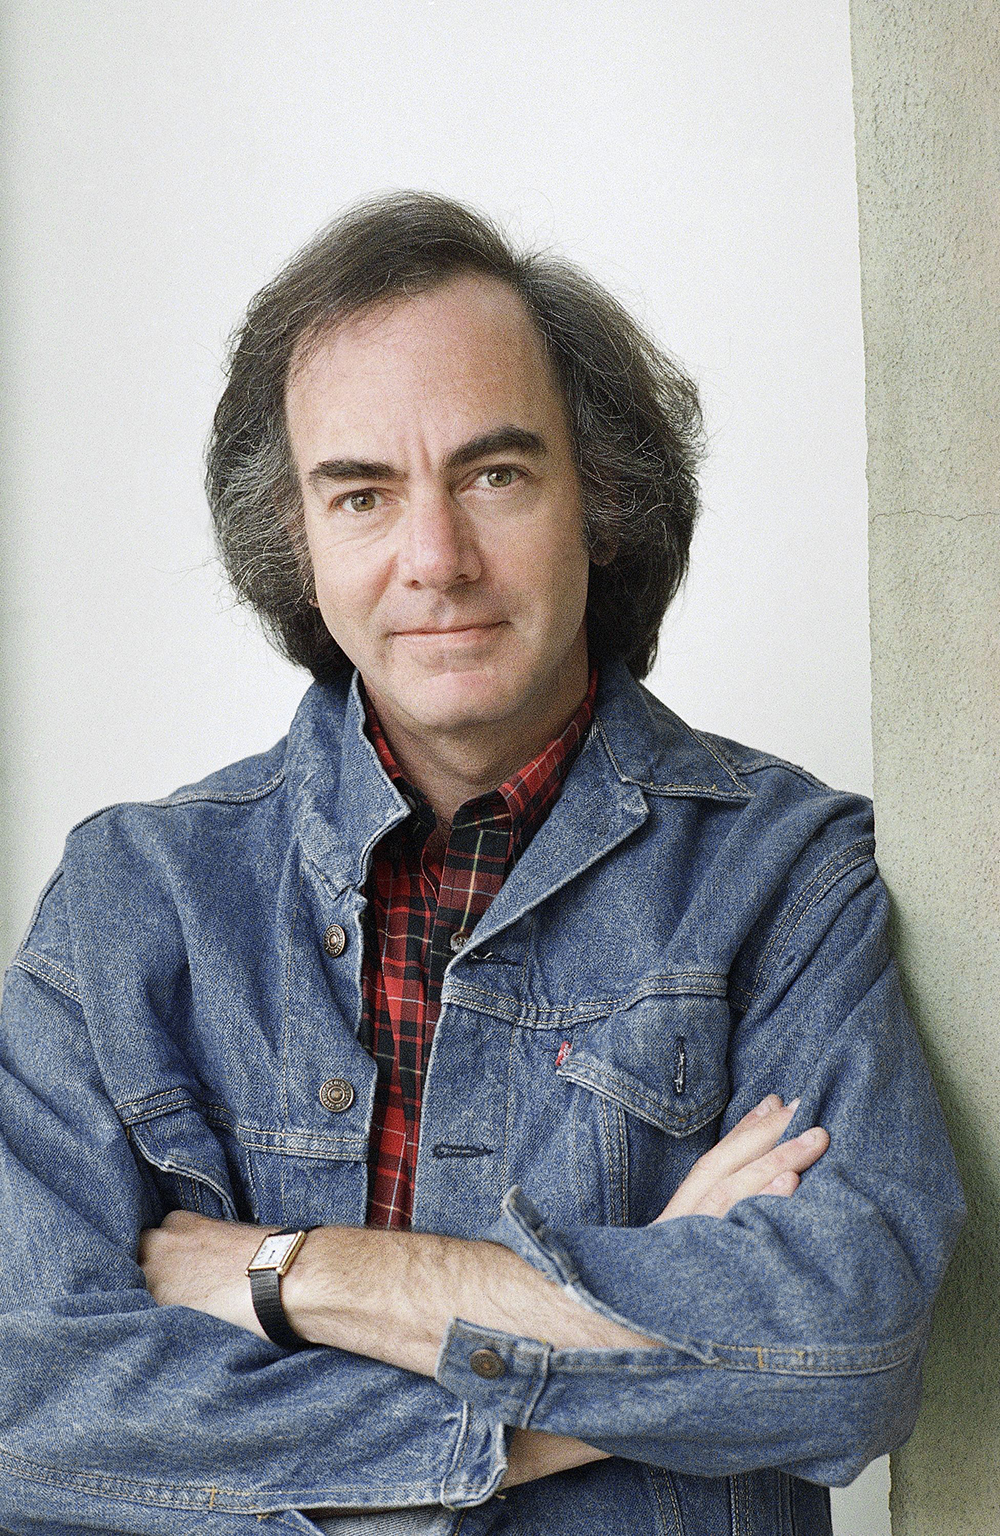 Neil Diamond's spouses and children: who are the people in his life? 